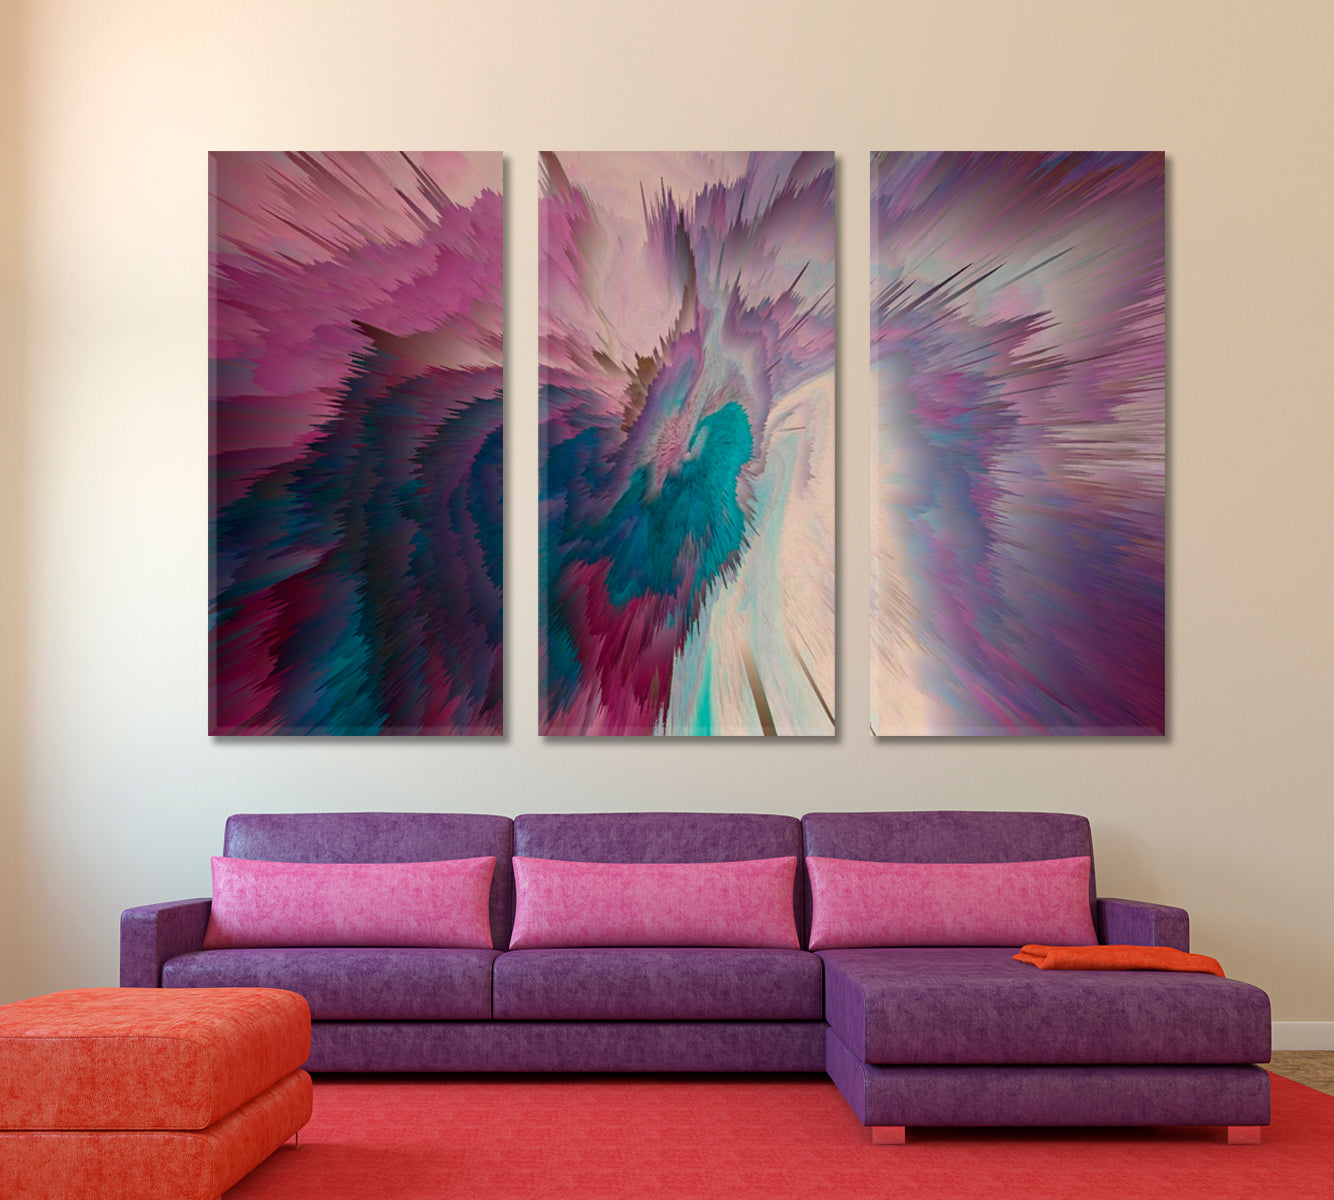 Colorful Abstract Space Abstract Art Print Artesty 3 panels 36" x 24" 